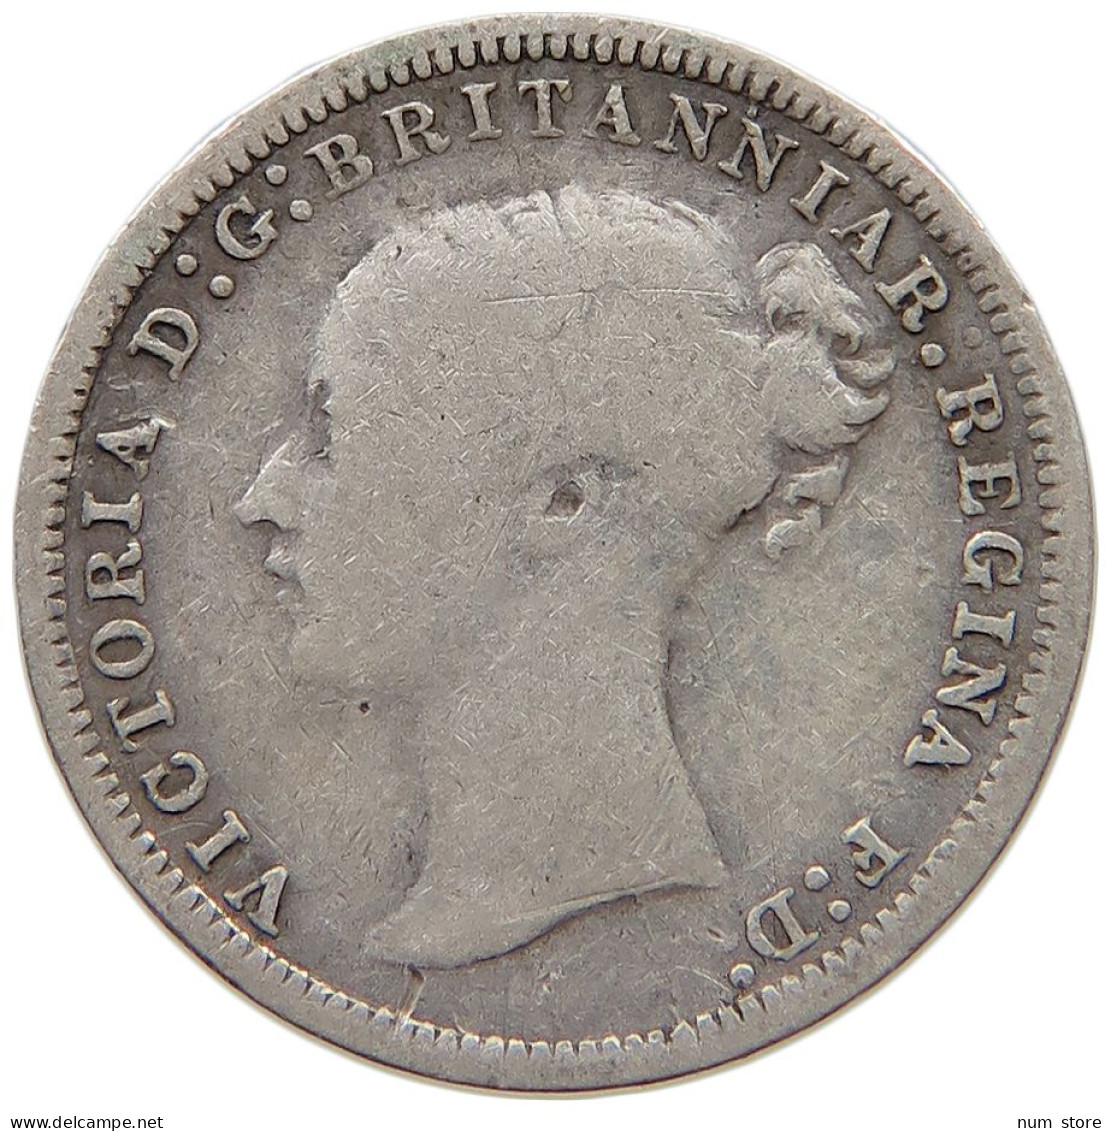 GREAT BRITAIN THREEPENCE 1874 Victoria 1837-1901 #c052 0269 - F. 3 Pence